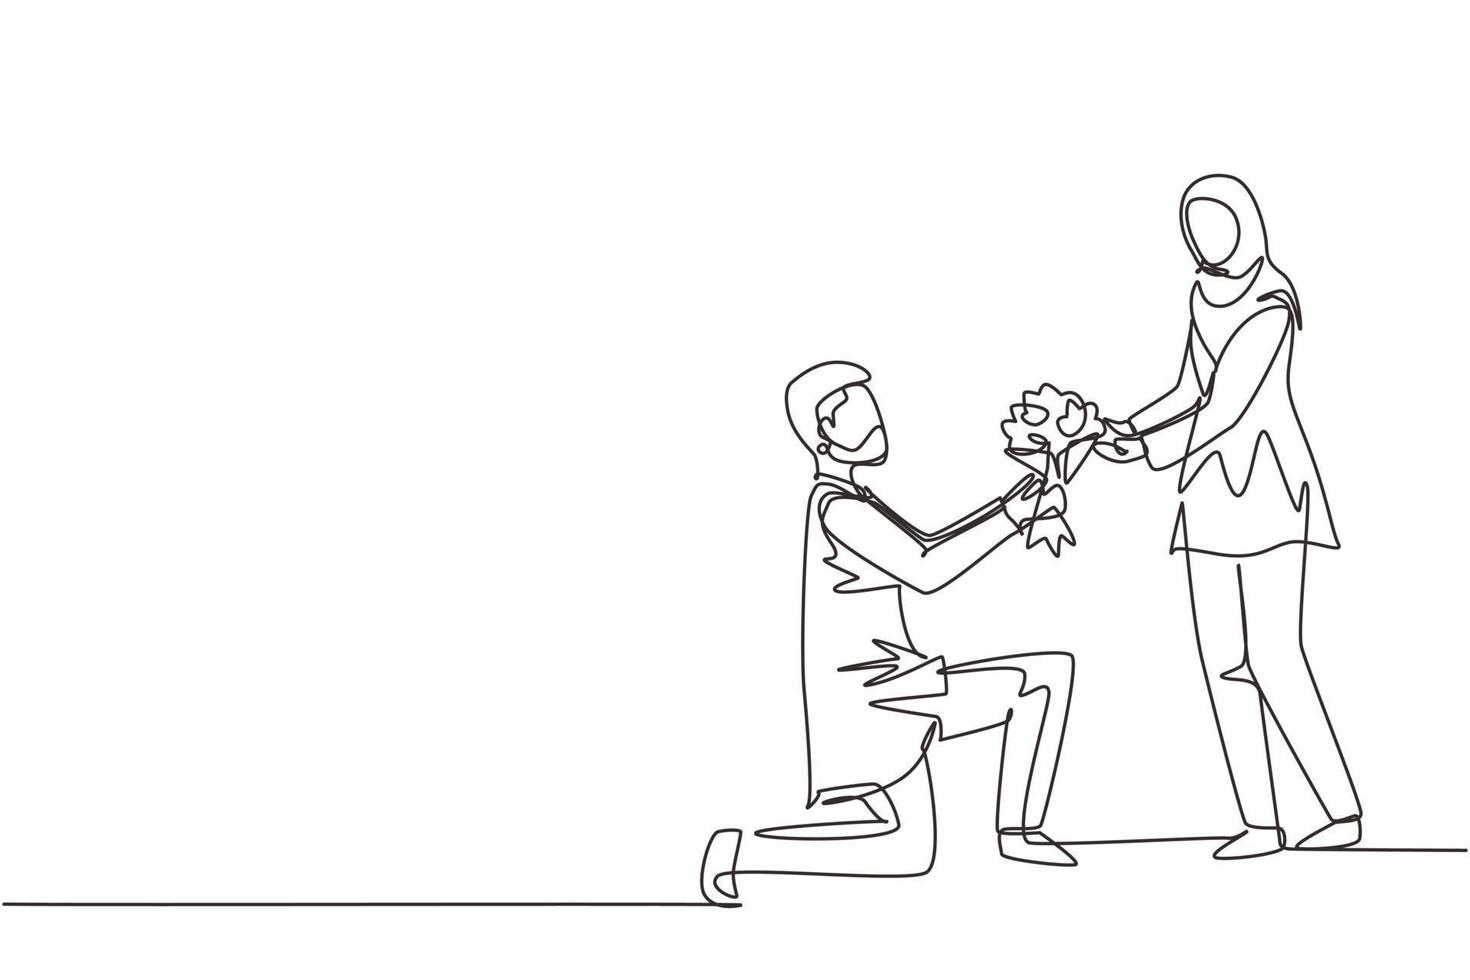 Single continuous line drawing Arab man on knee making marriage proposal to woman with bouquet. Boy in love giving flowers. Happy couple getting ready for wedding. One line draw graphic design vector